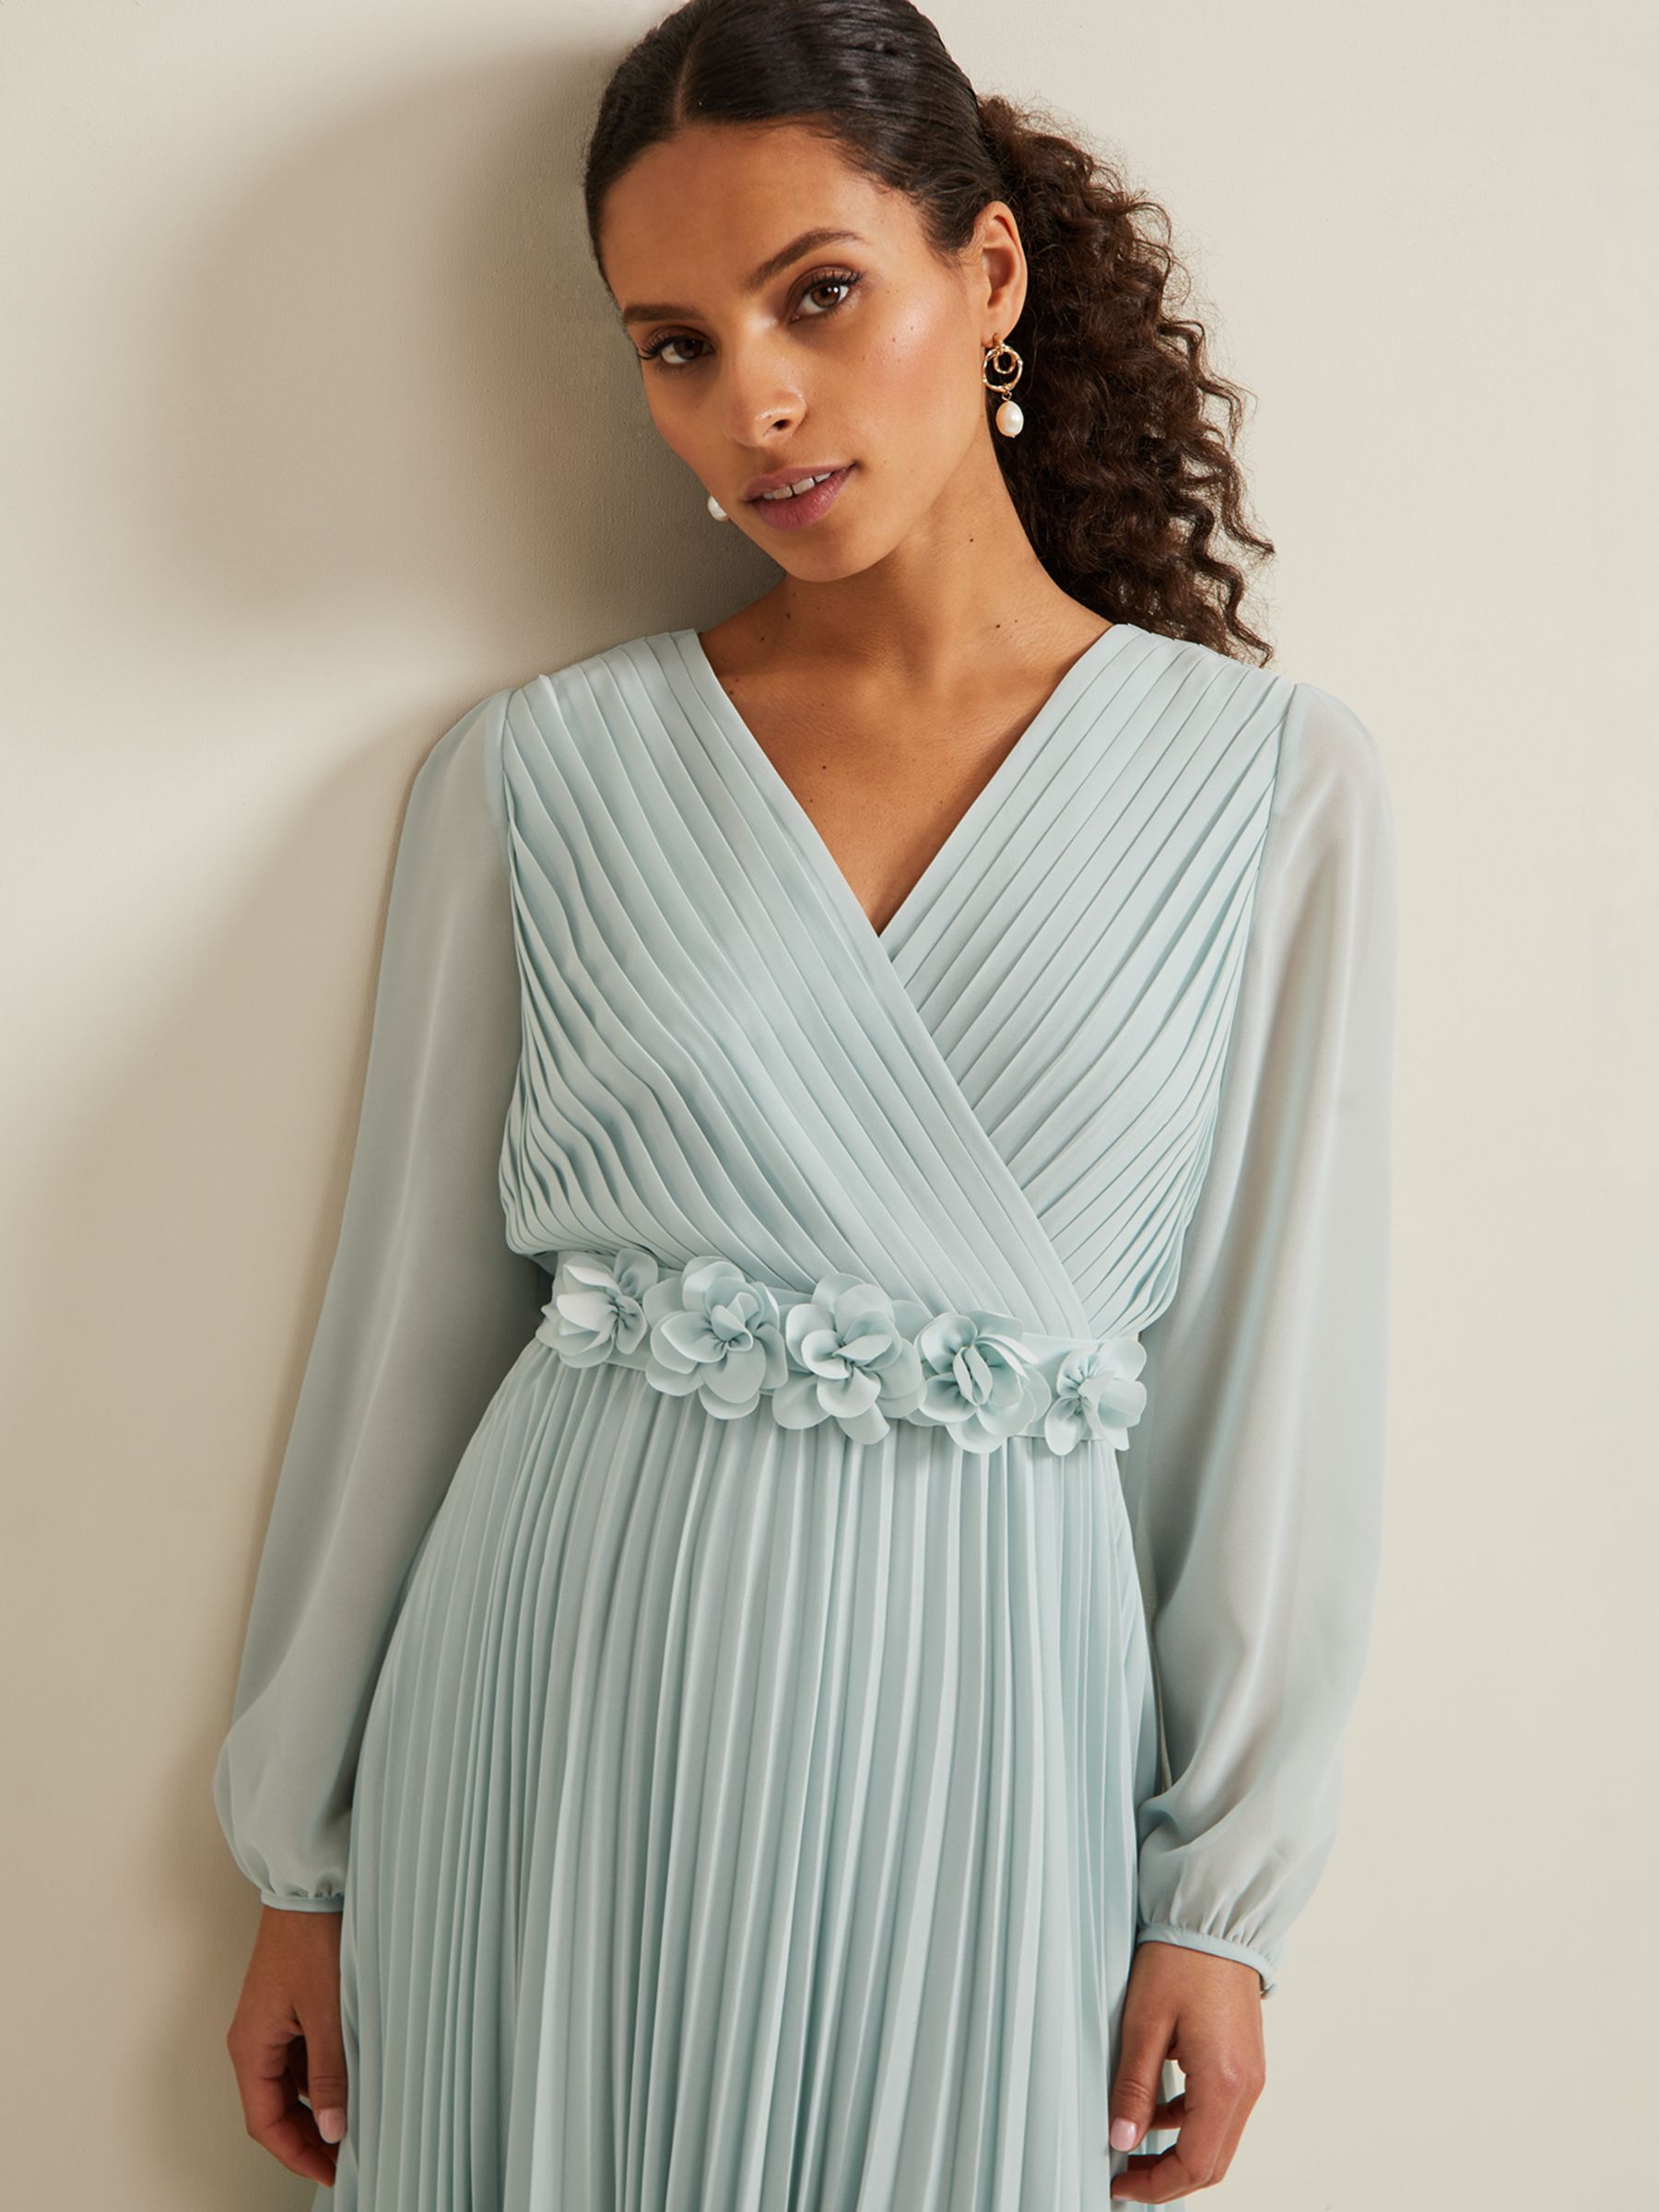 Buy Phase Eight Petite Alecia Pleated Maxi Dress Online at johnlewis.com